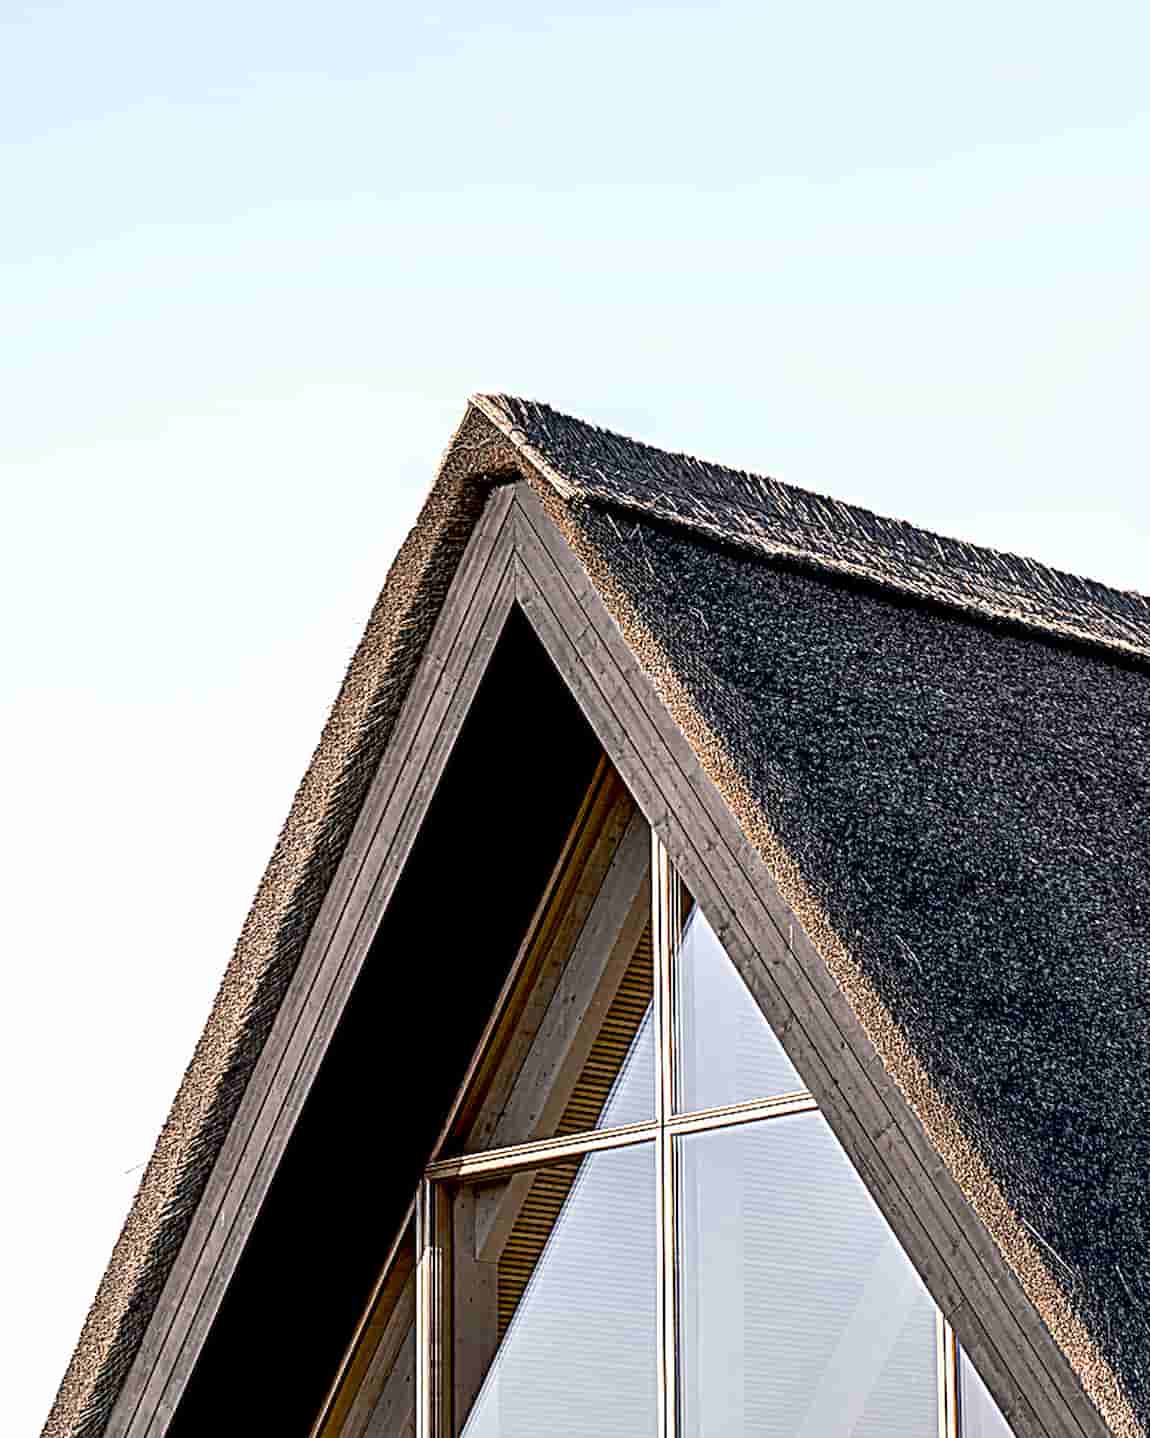 The Summer House Skagen Klitgård pays Tribute to local Architecture and the History of the Town